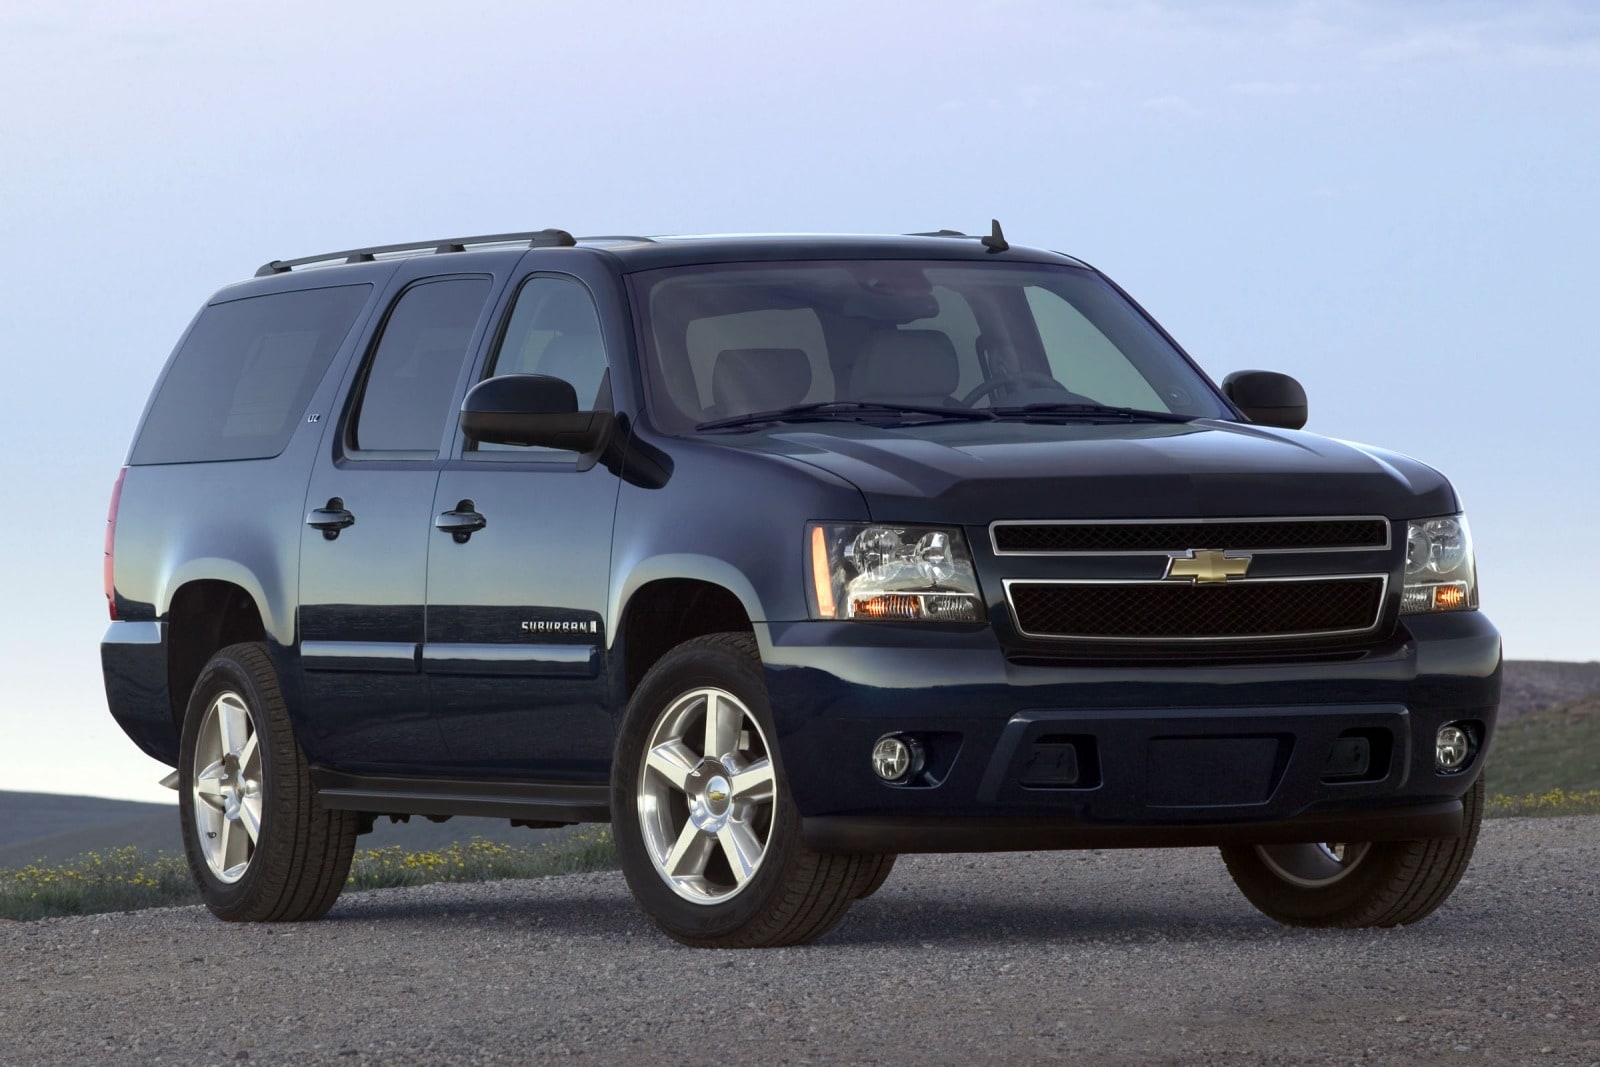 2009 Chevy Suburban Review Ratings